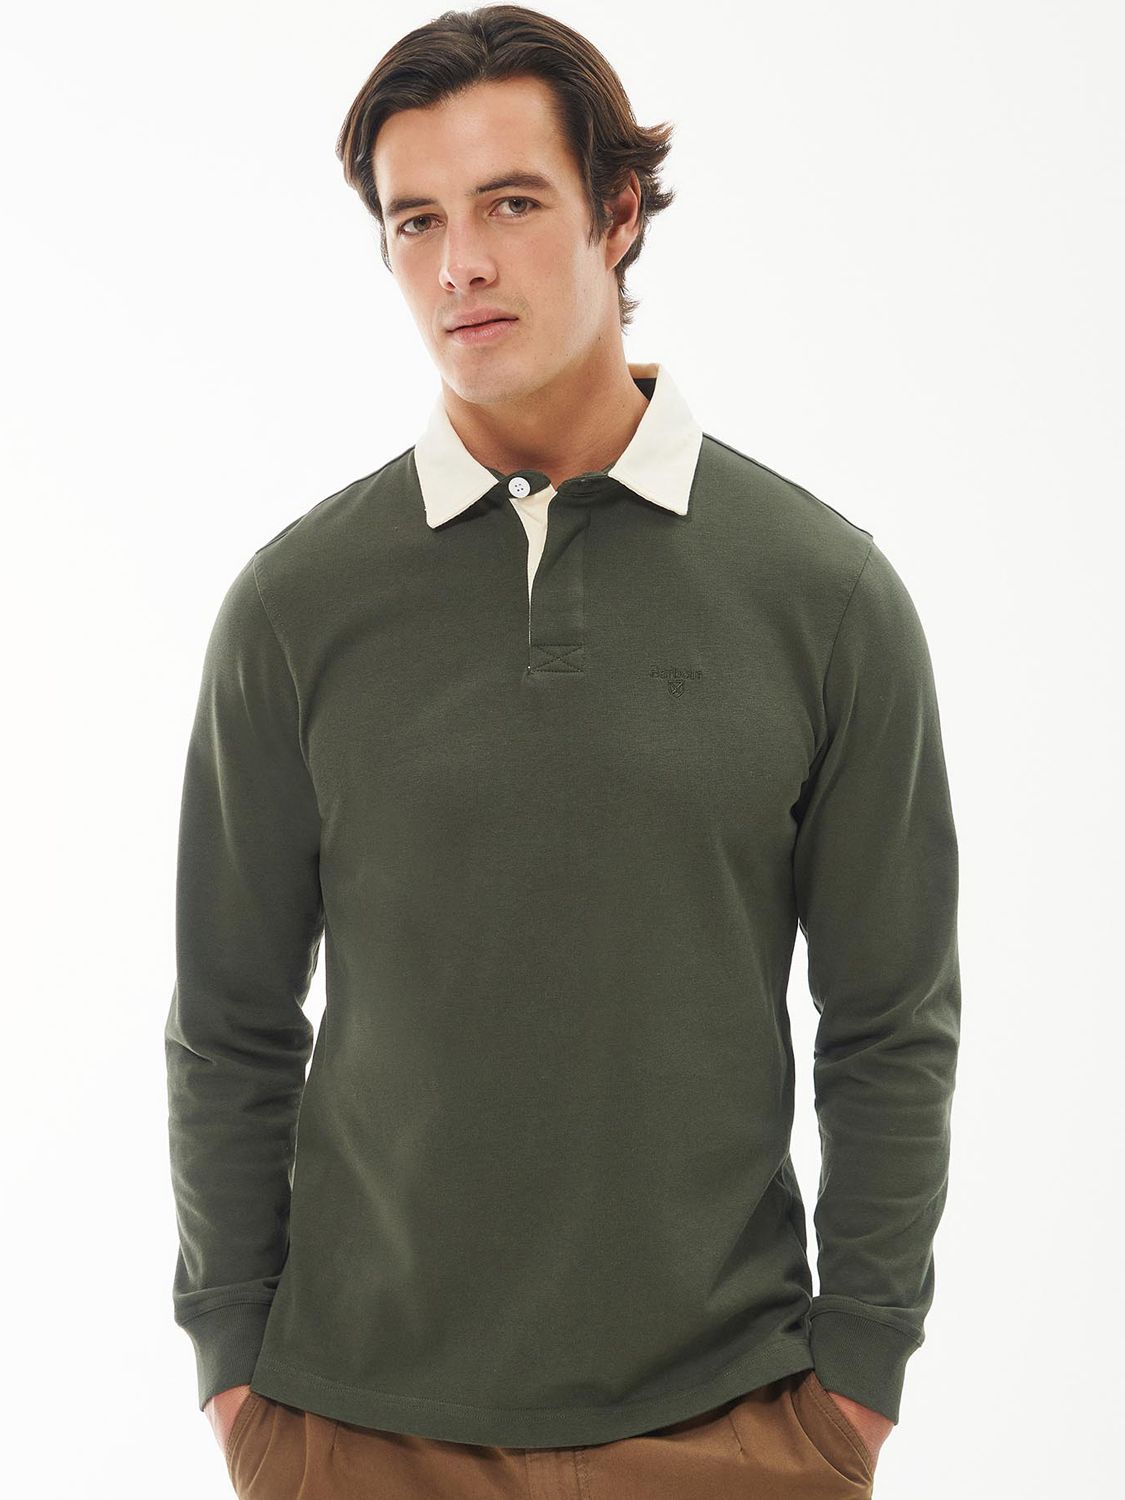 Barbour Howtown Rugby Shirt, Green, S